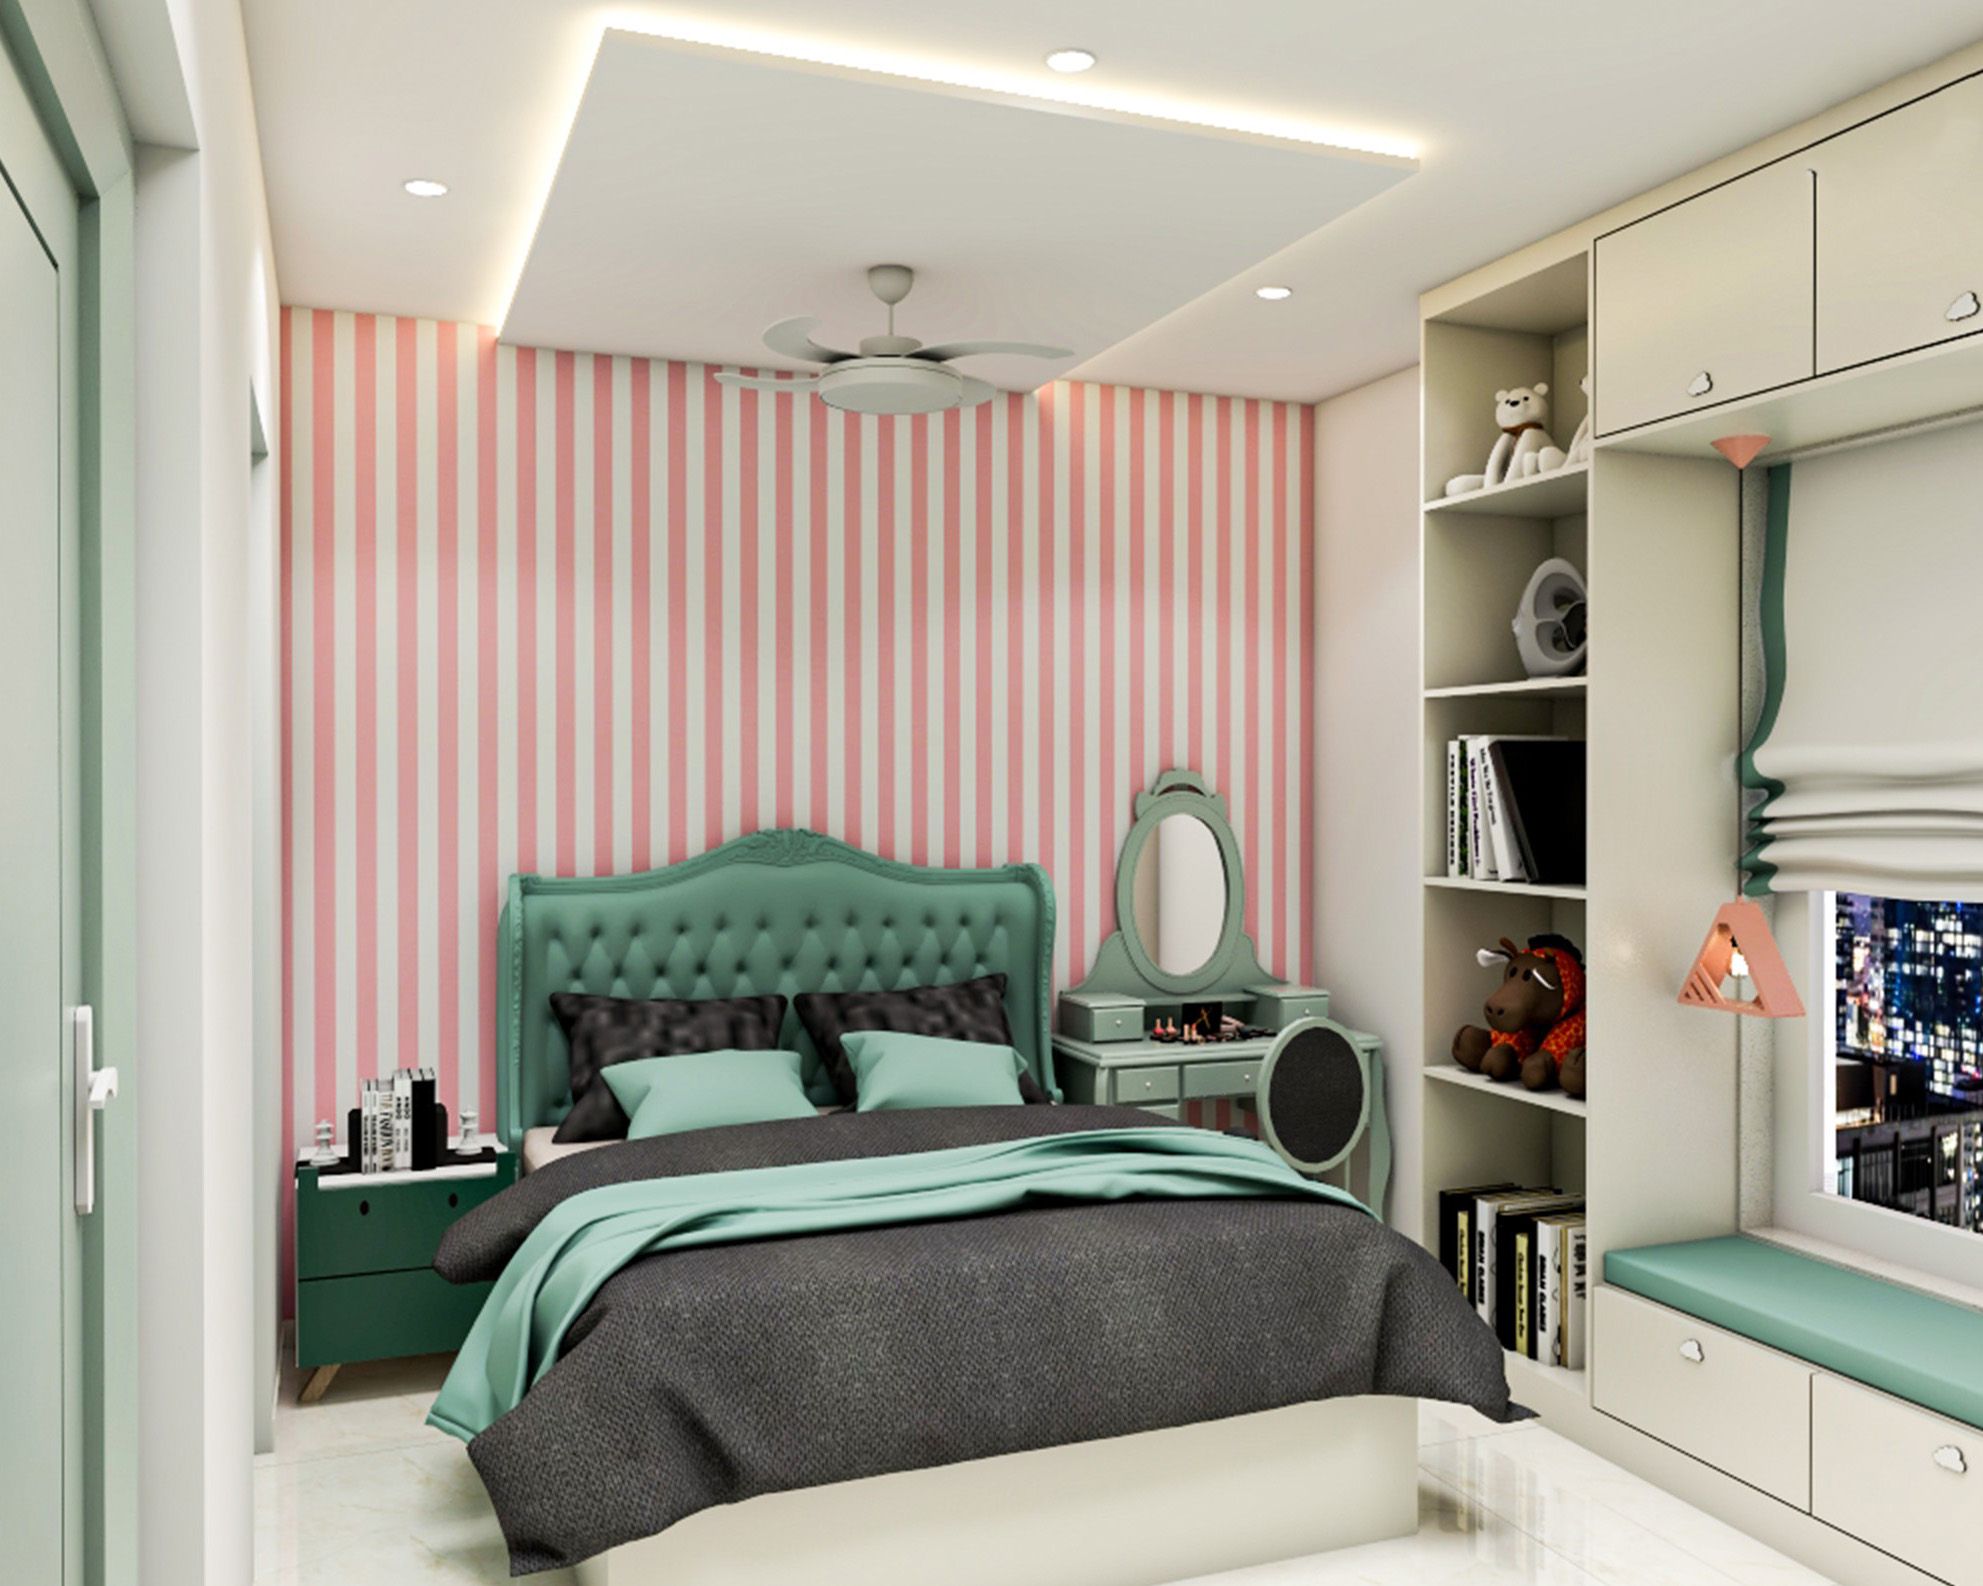 Contemporary Pink And White Striped Bedroom Wall Paint Design